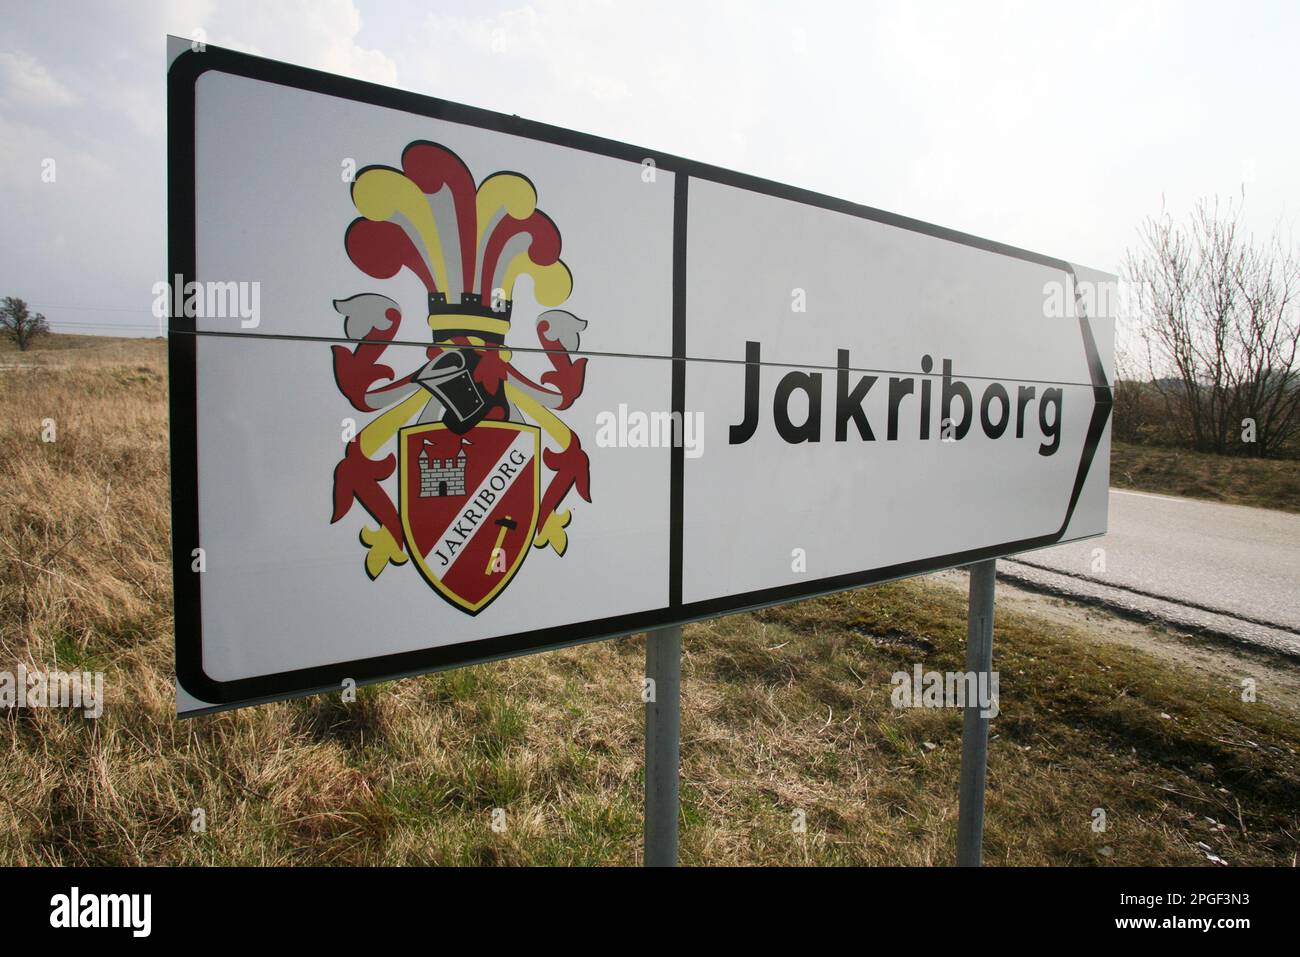 JAKRIBORG is a housing estate in Hjärup between Malmö and Lundin southern Sweden,The Jakriborg project display similarities with the contemporary New Urbanism movement and is often compared to the Poundbury project in England built y Prince Charles Stock Photo